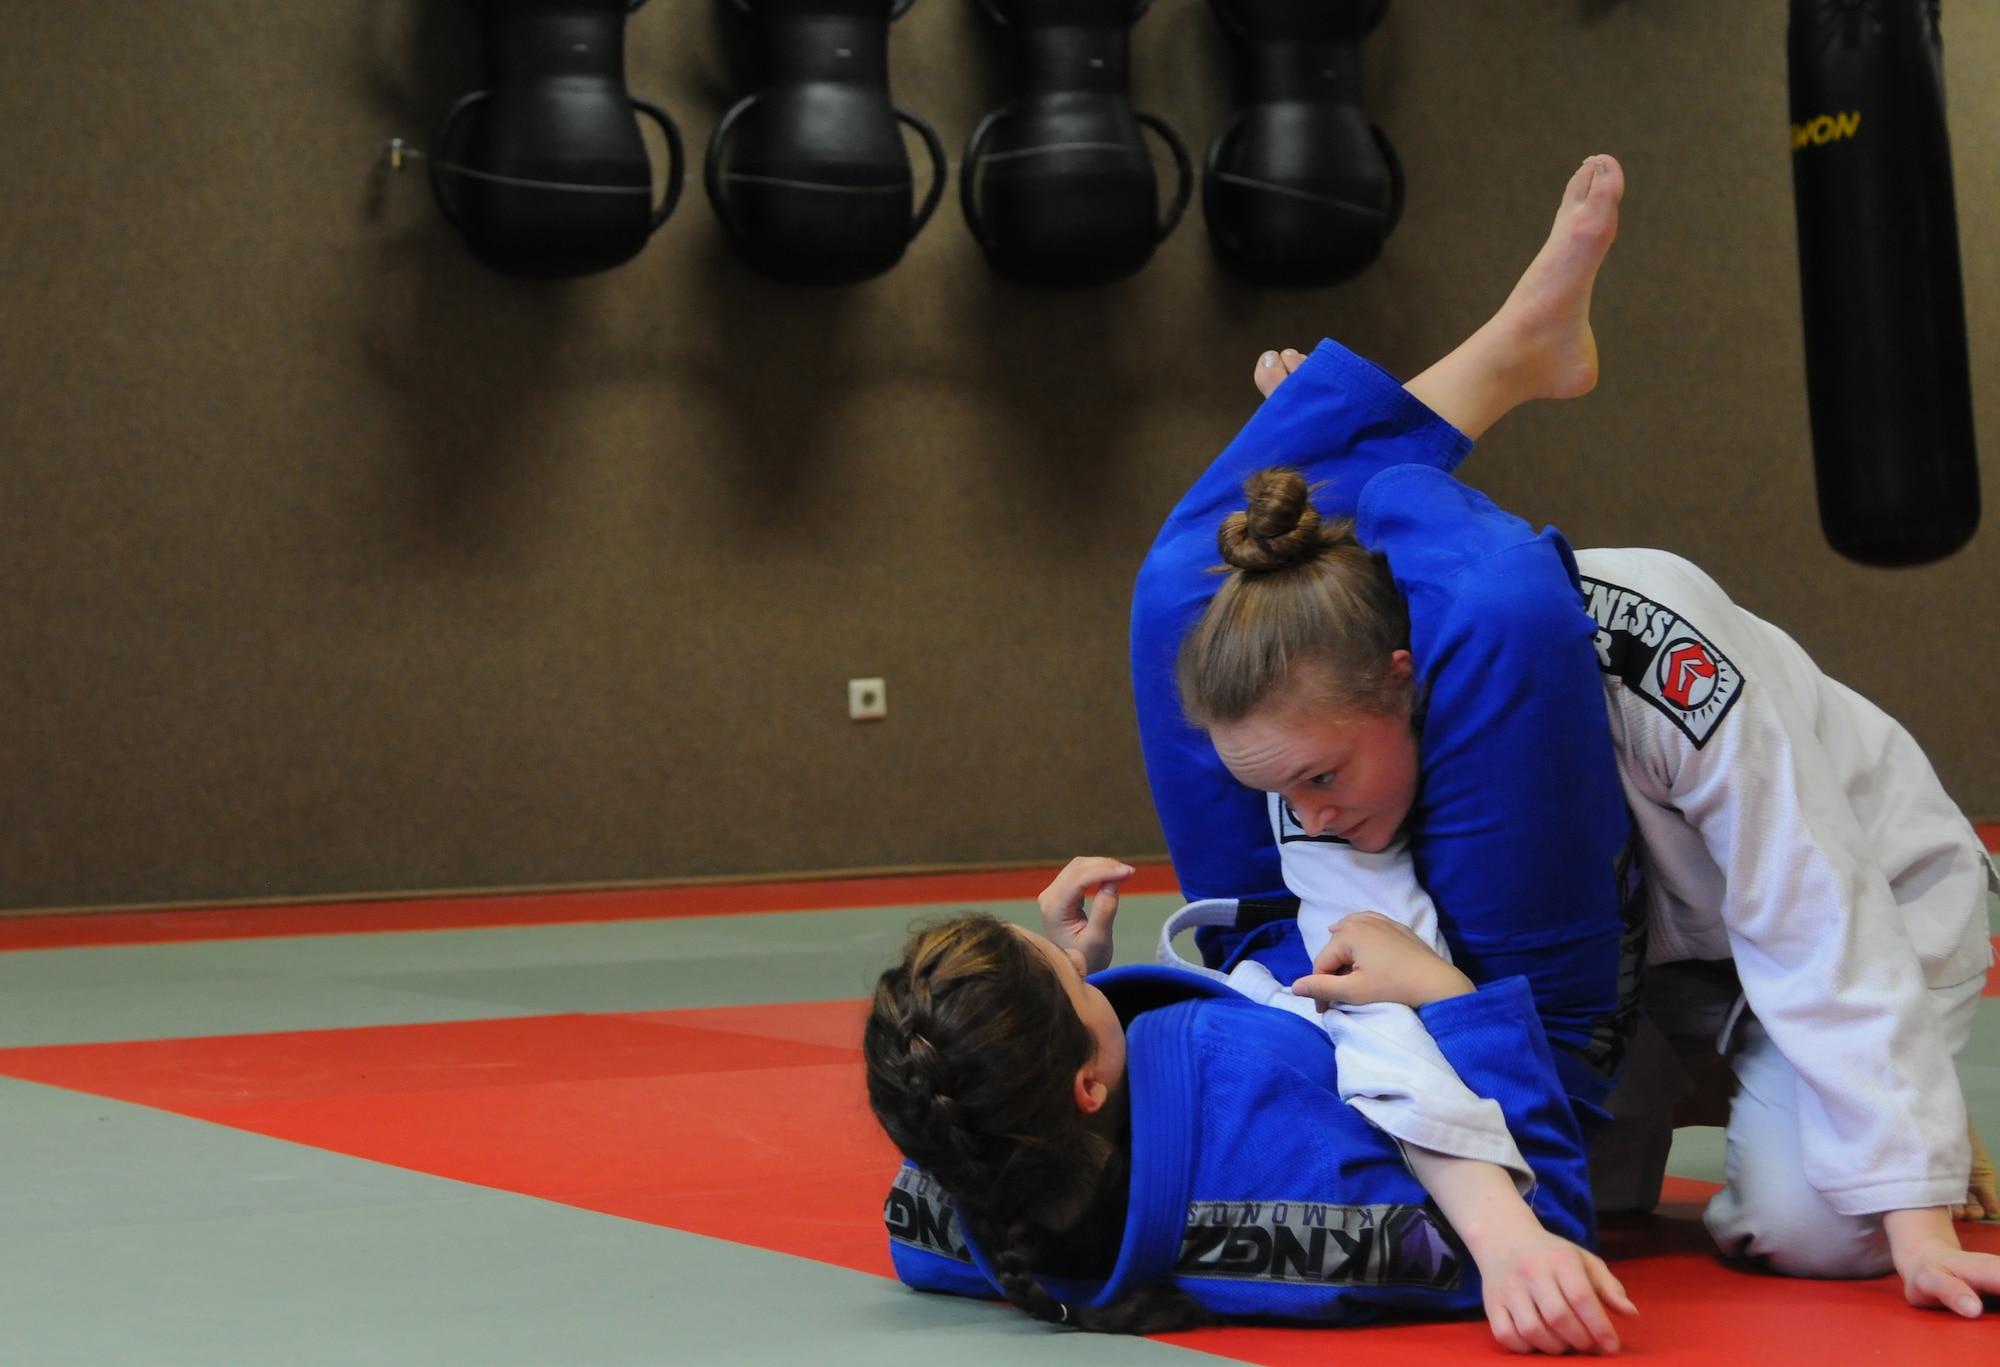 Mariah Johnson, a 52nd Force Support Squadron value-added tax officer, left, and U.S. Air Force Senior Airman Catherine Westervelt, a 52nd Fighter Wing legal office paralegal, both members of the Spangdahlem Brazilian Jiu Jitsu class, practice before Johnson’s first match at the Submissao competition in Karlsruhe, Germany, Feb. 20, 2016. Johnson started practicing Jiu Jitsu during November 2015. (Courtesy photo)